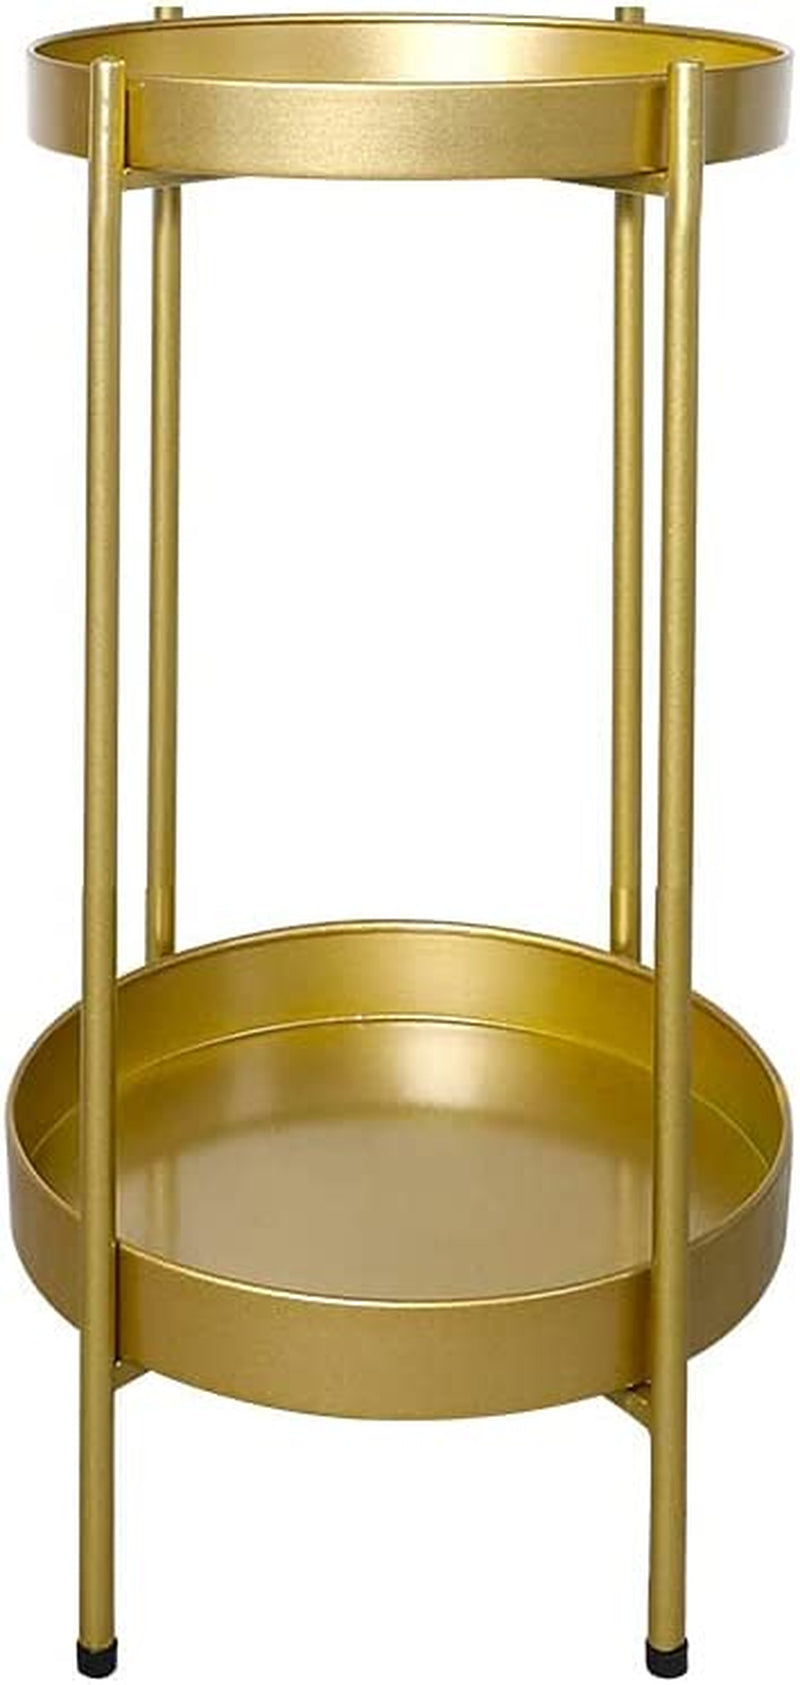 LEVEDE, Levede 2 Tier Plant Stand 50Cm Tall Metal - Round, Indoors, Outdoors, Flower Pot, Shelf, Holder, Balcony, Garden, Gold